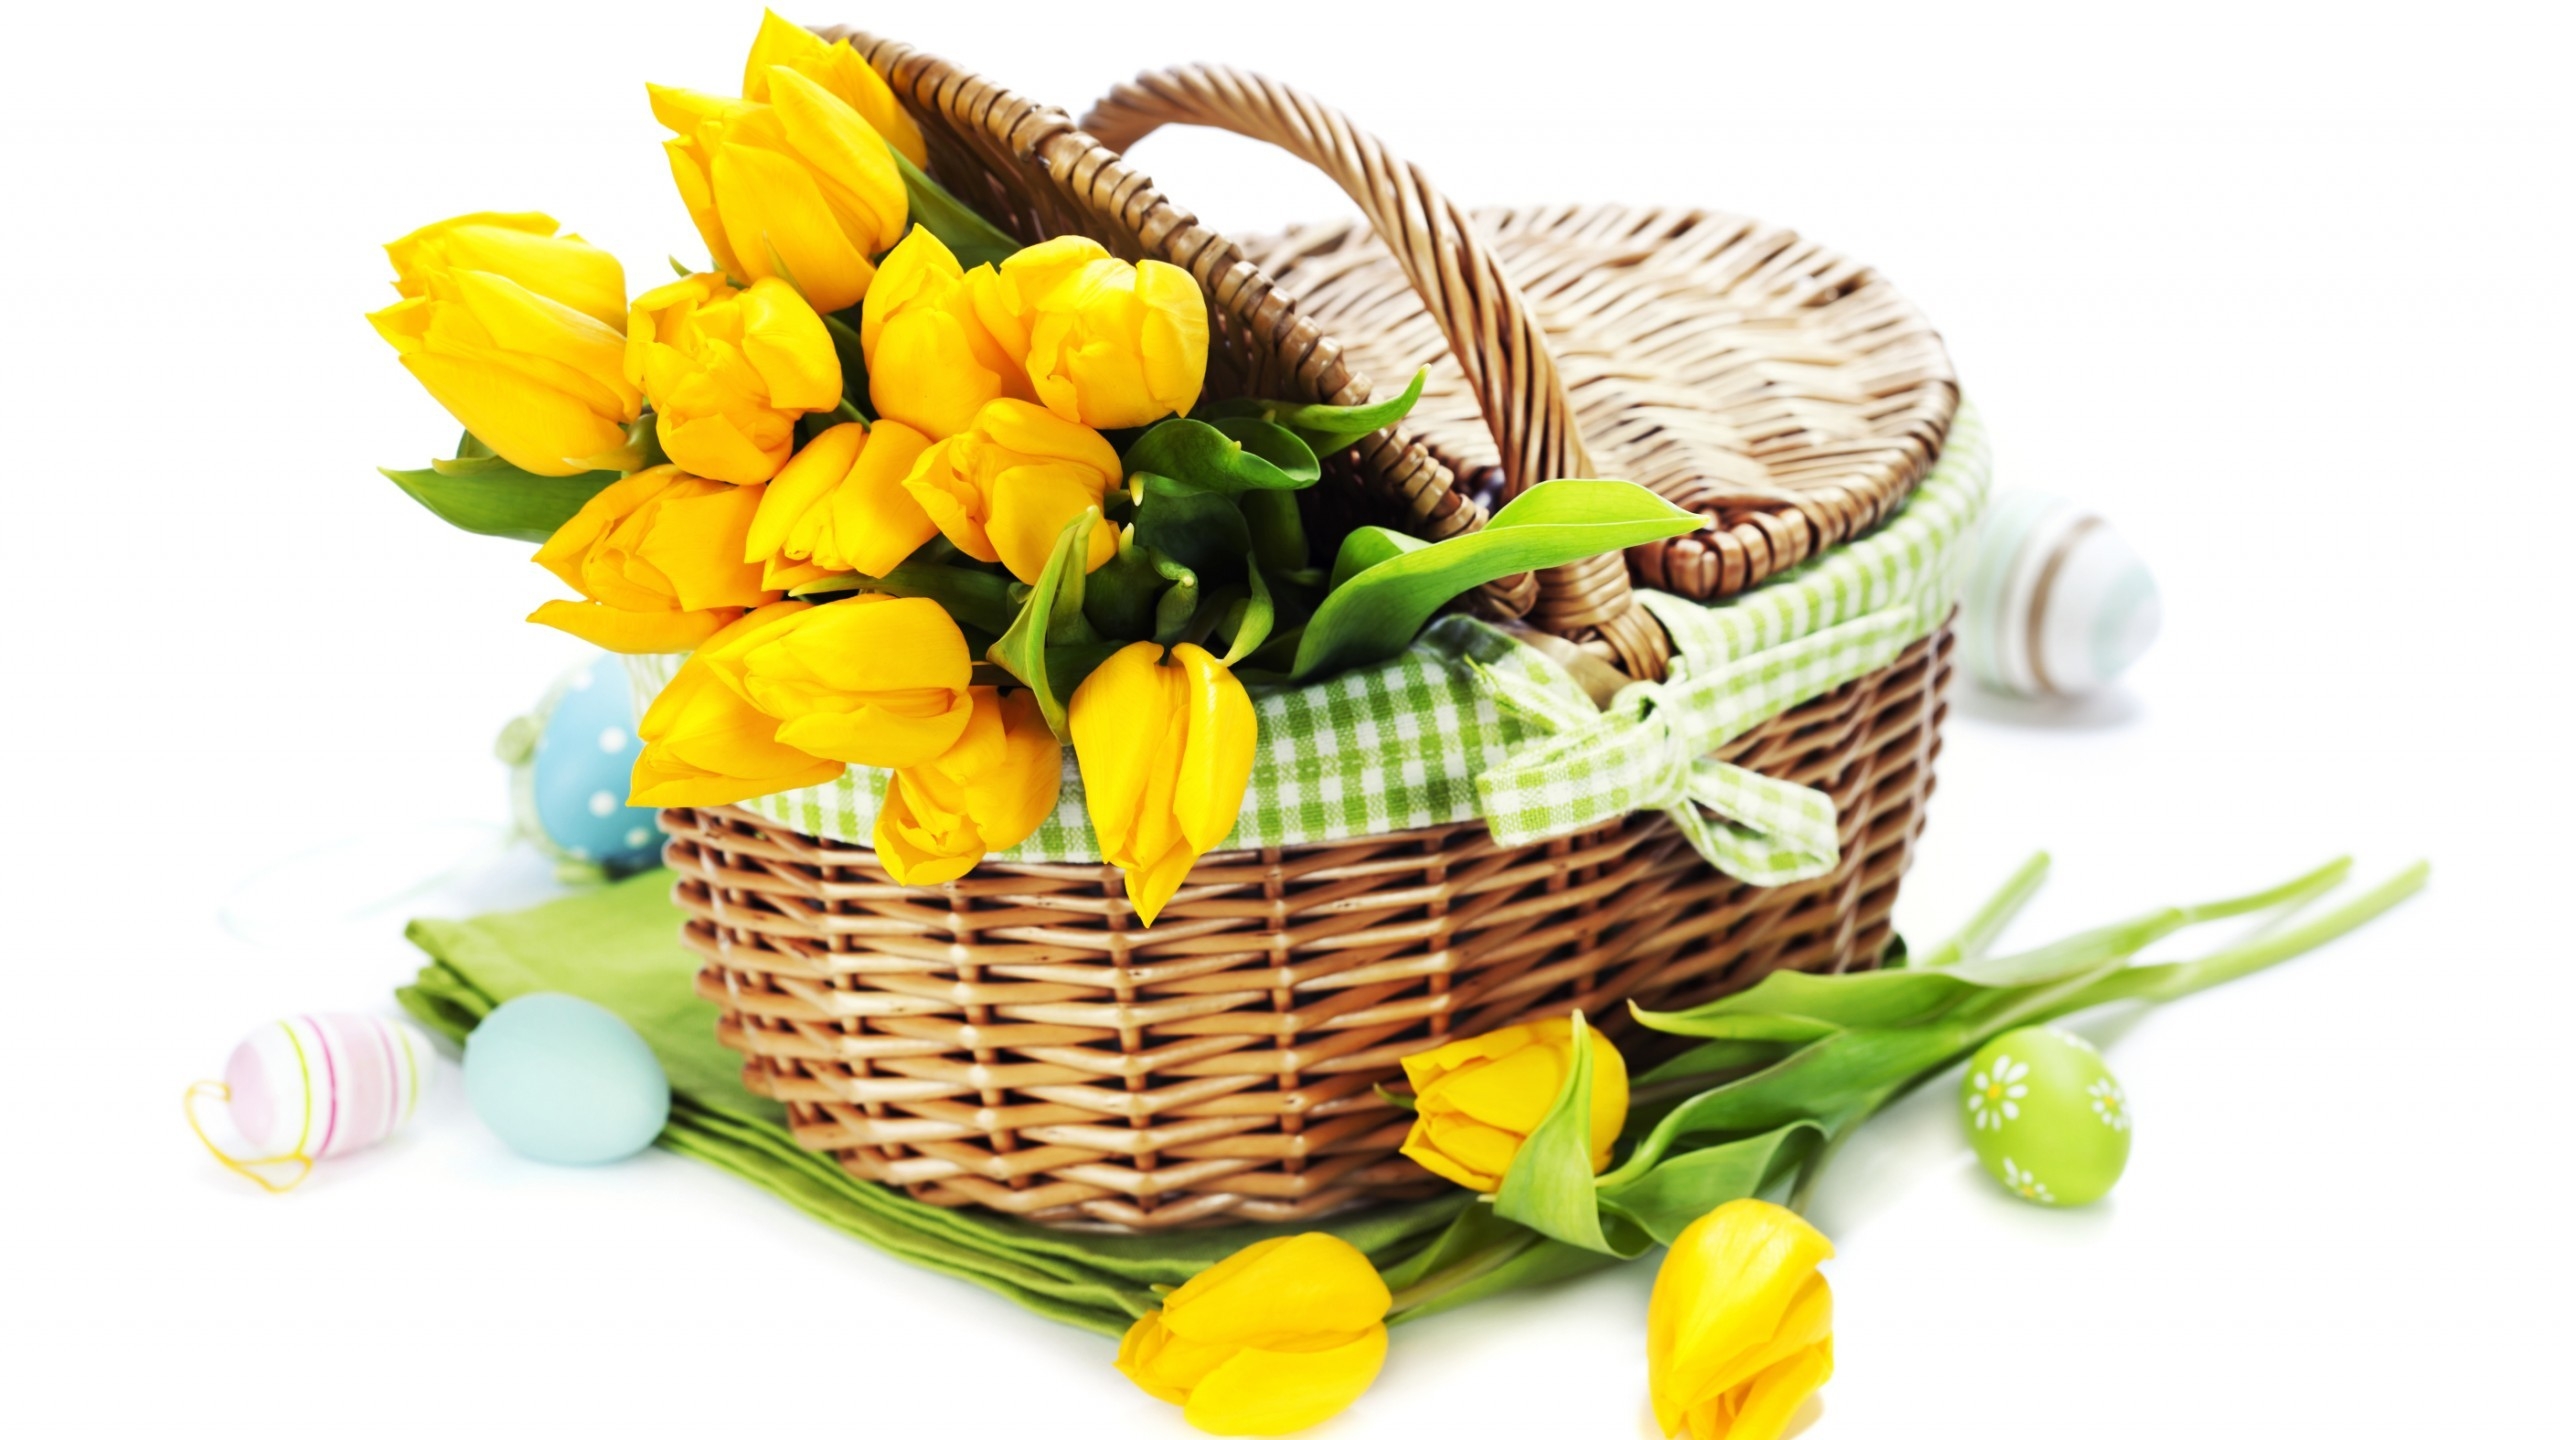 Yellow Tulips Basket for 2560x1440 HDTV resolution